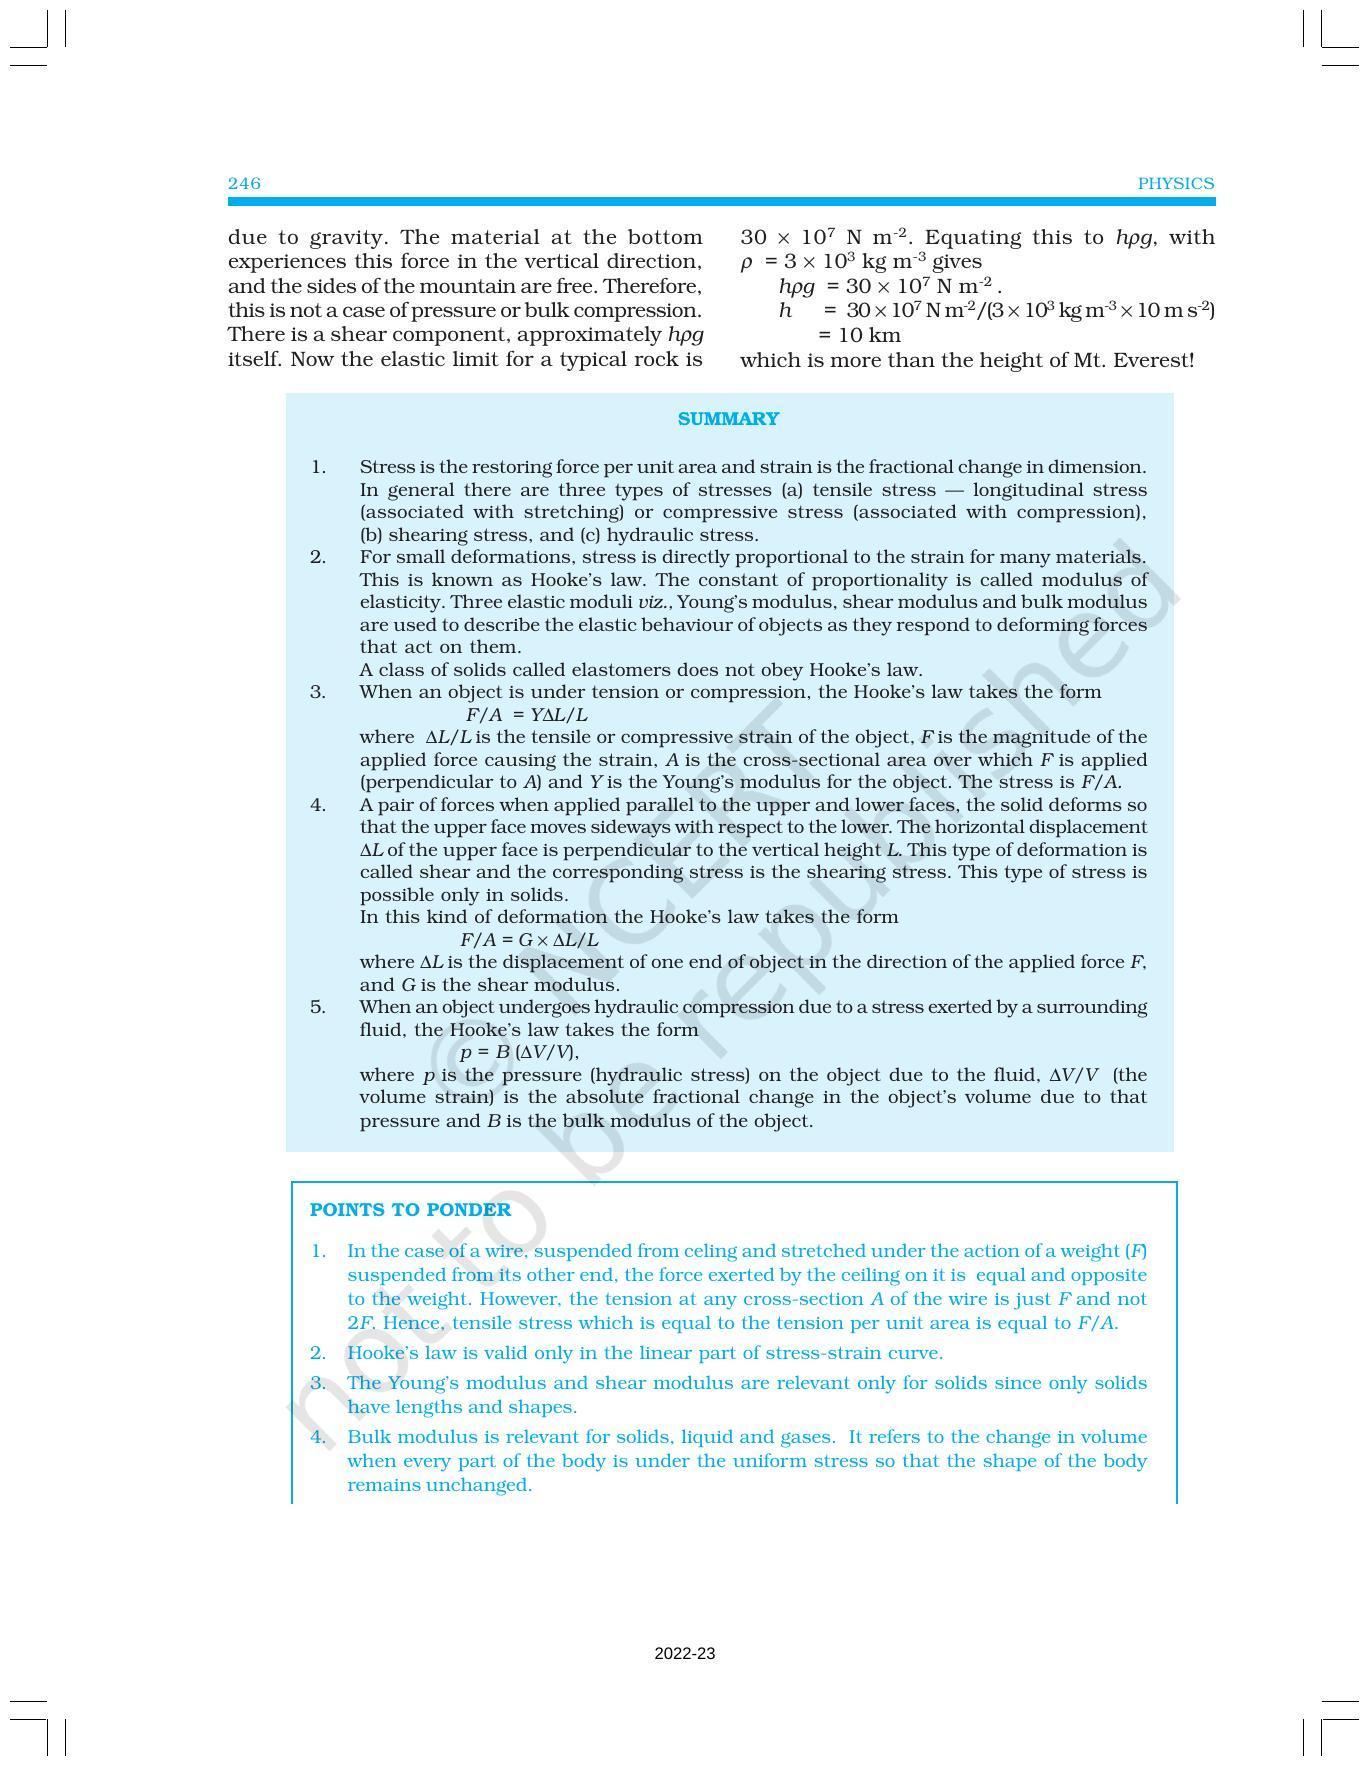 NCERT Book for Class 11 Physics Chapter 9 Mechanical Properties of Solids - Page 12